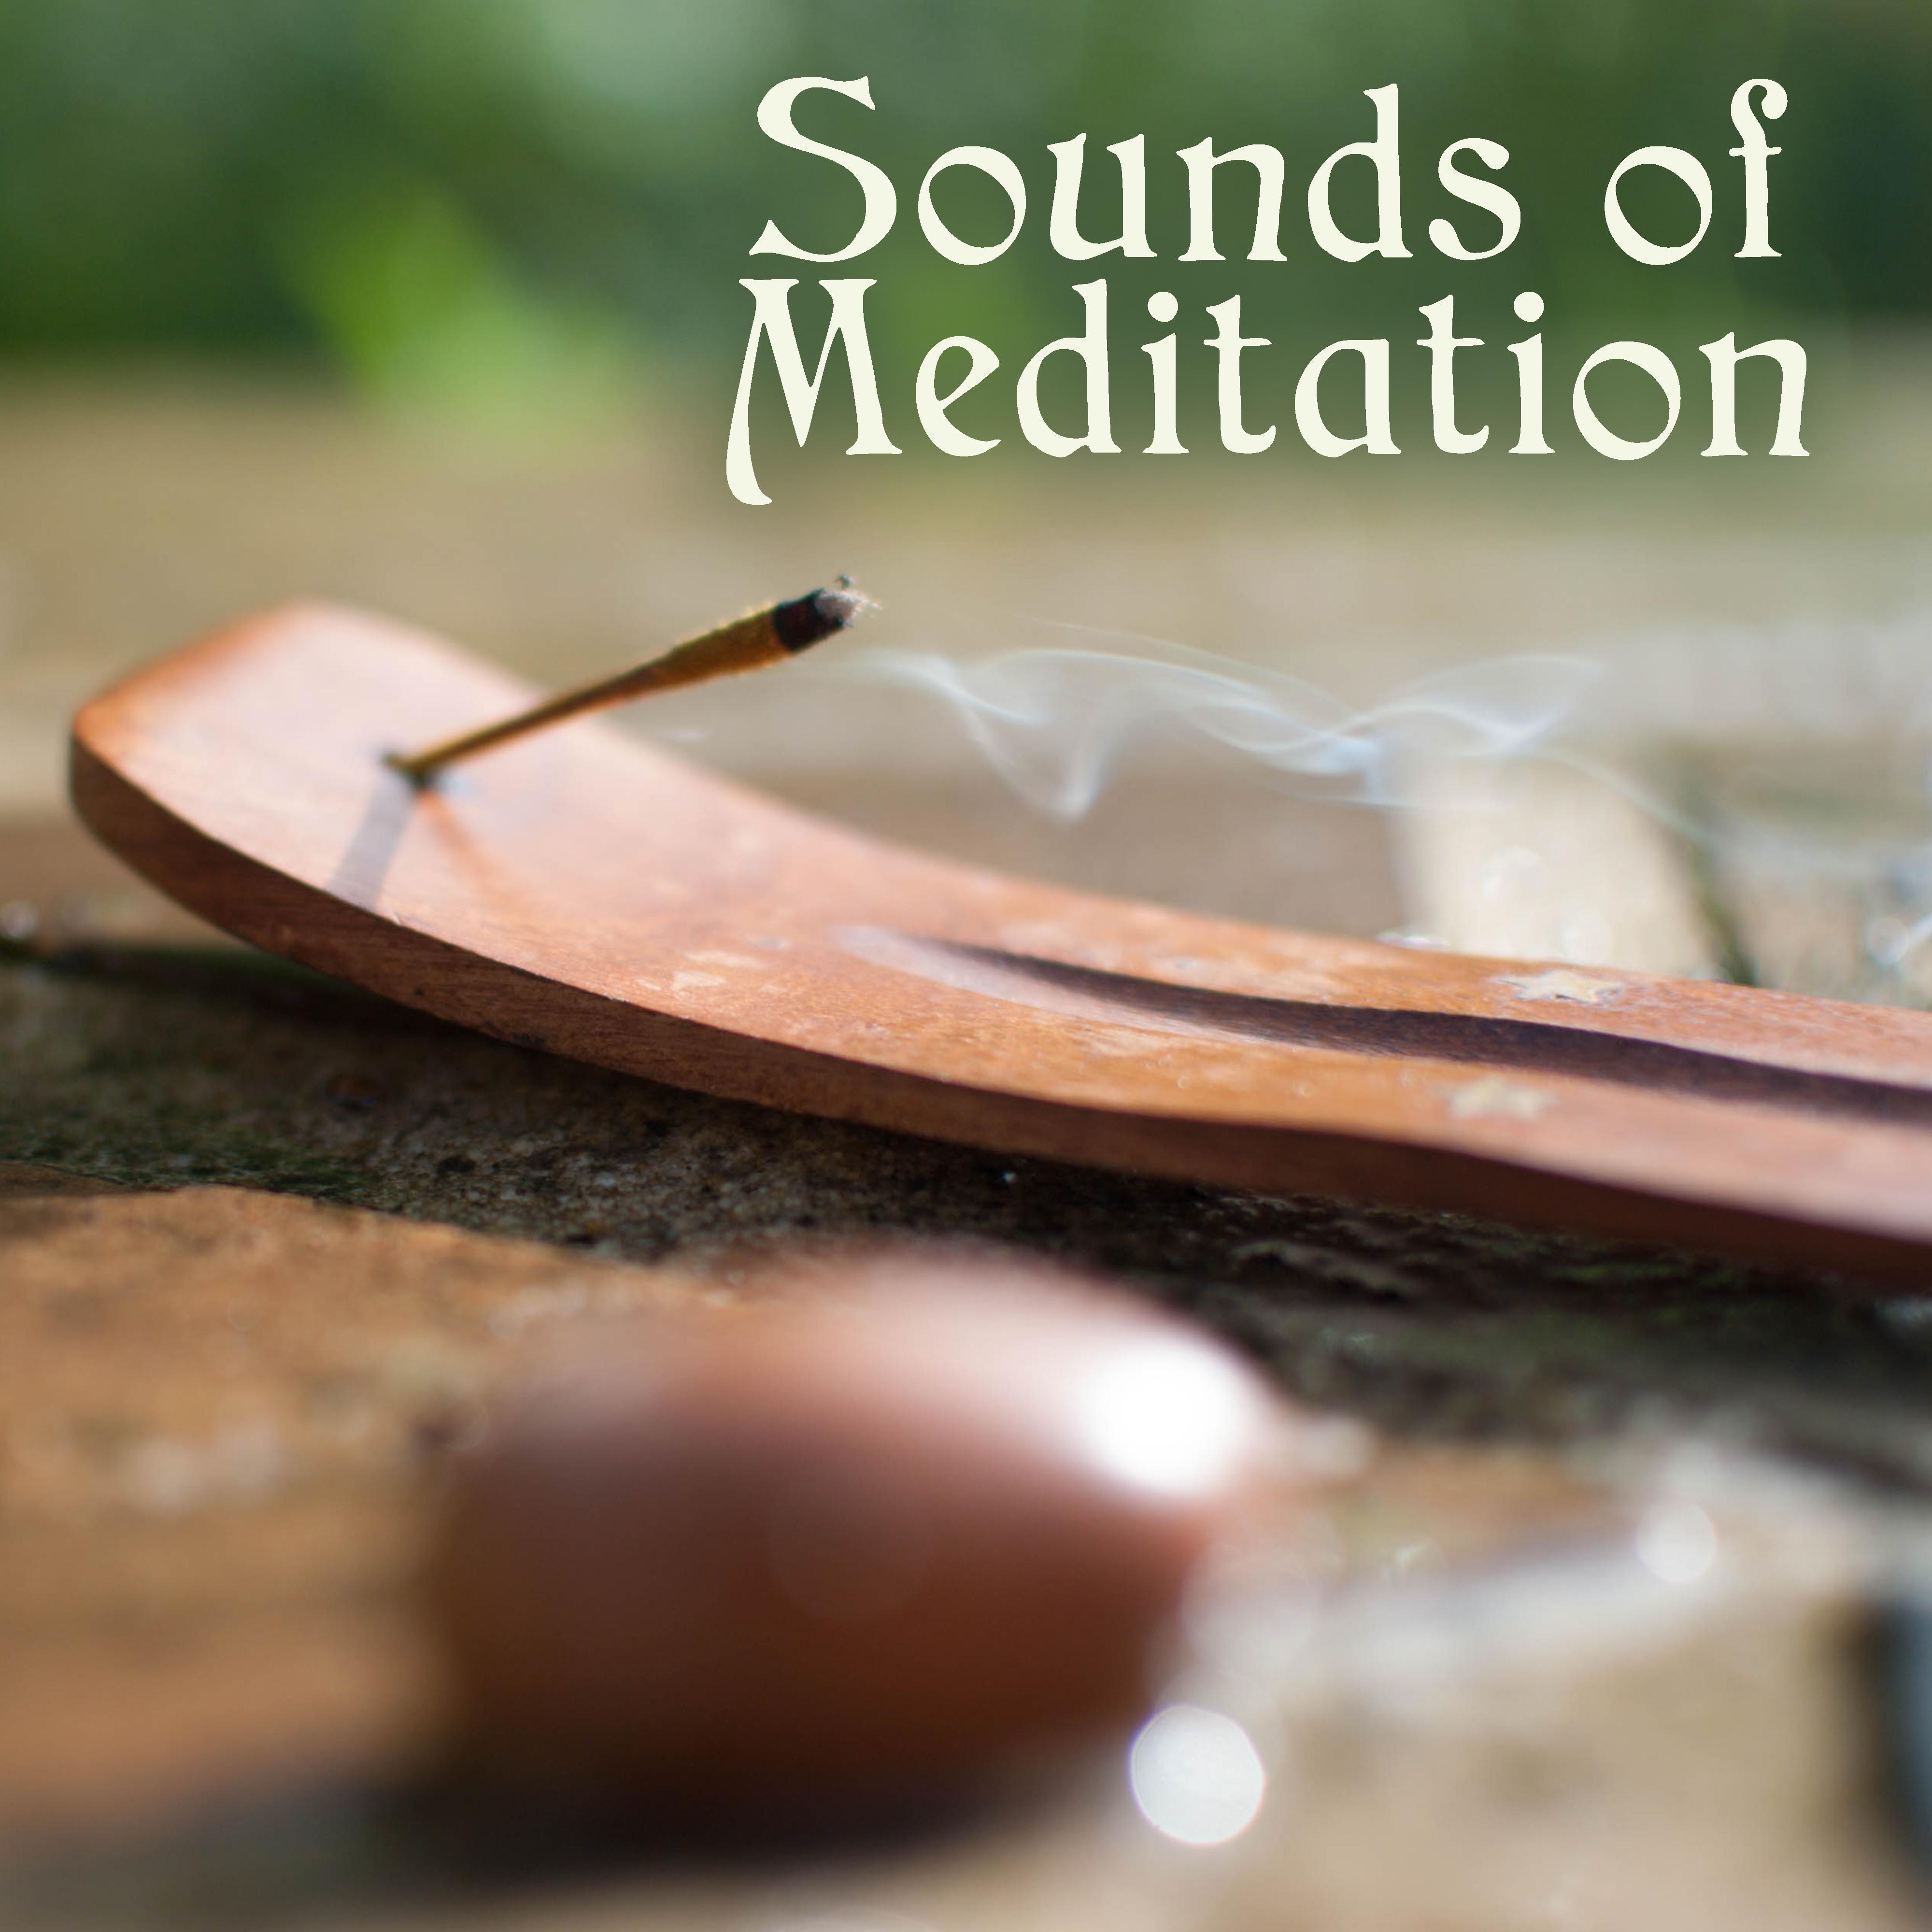 Sounds of Meditation  Yoga Music, Inner Zen, Calm Down, Peaceful Music for Deep Meditation, Tranquility